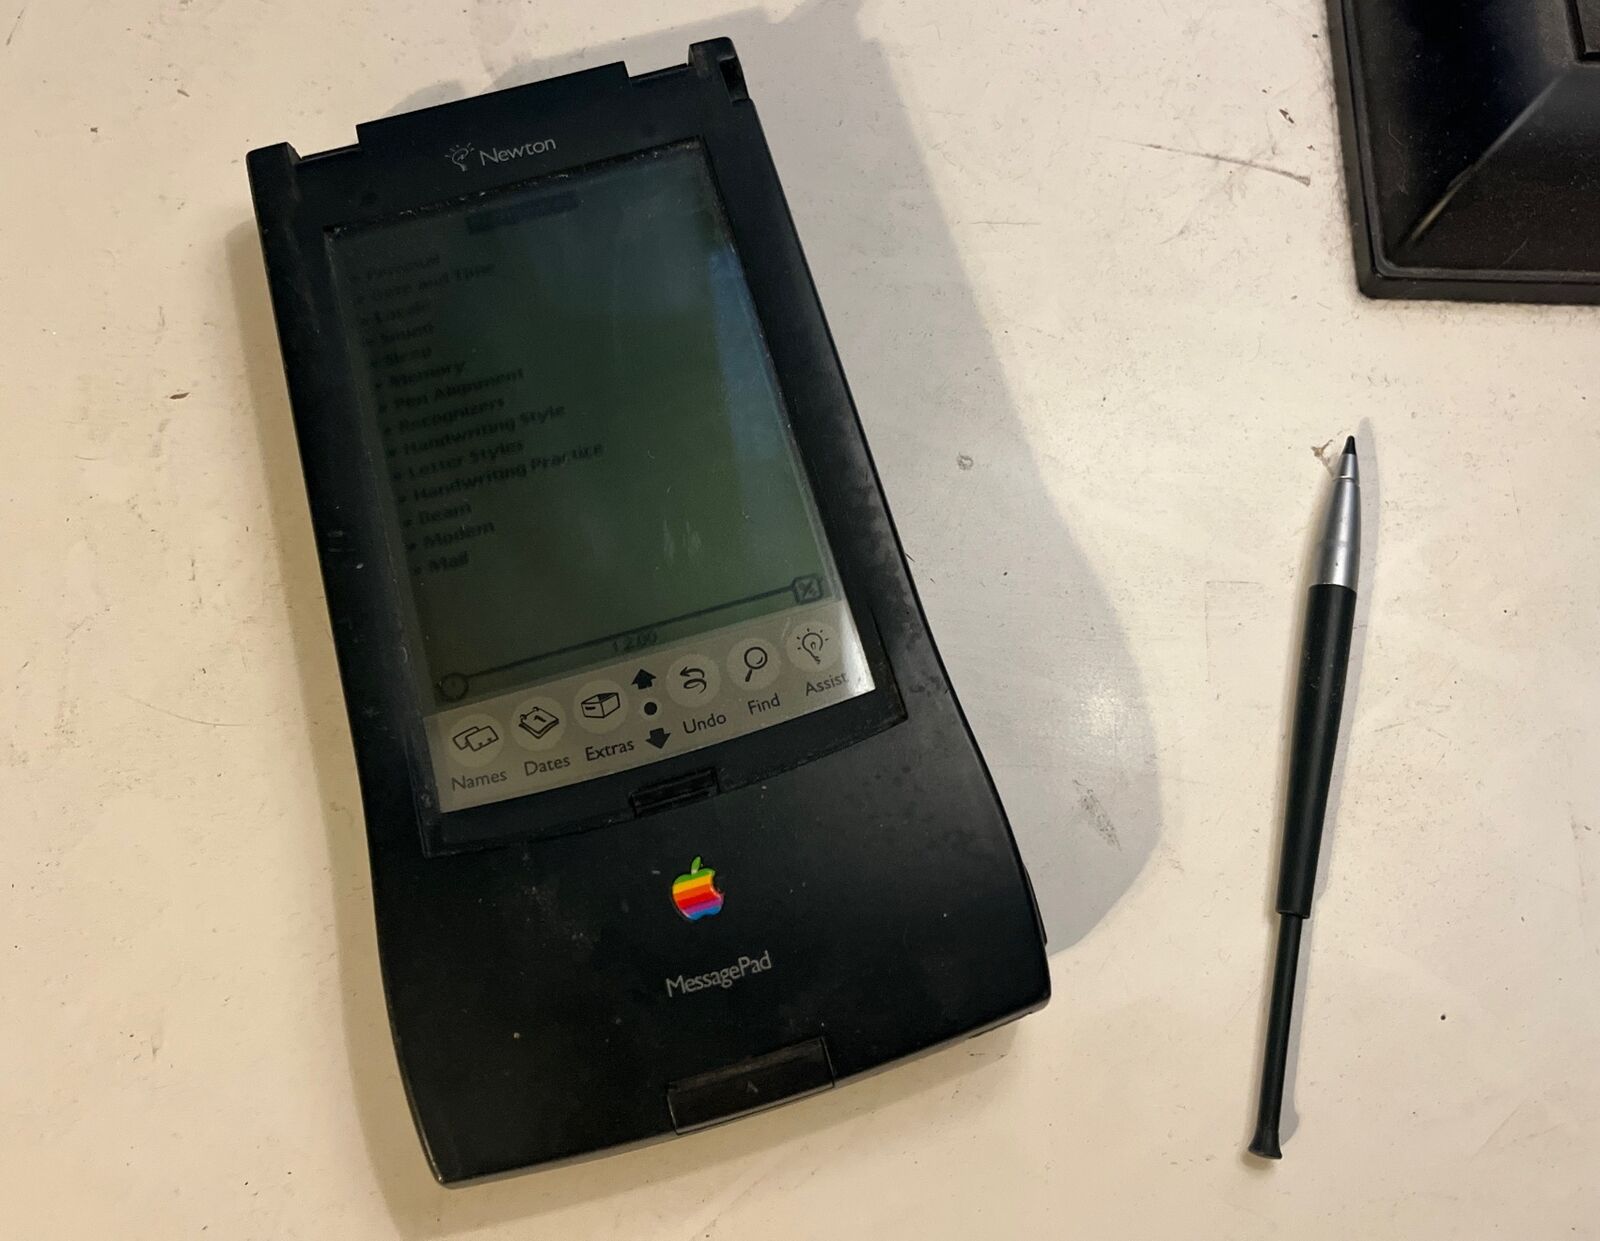 Apple Newton MessagePad 110 PDA H0059 Vintage Working with Stylus Pen